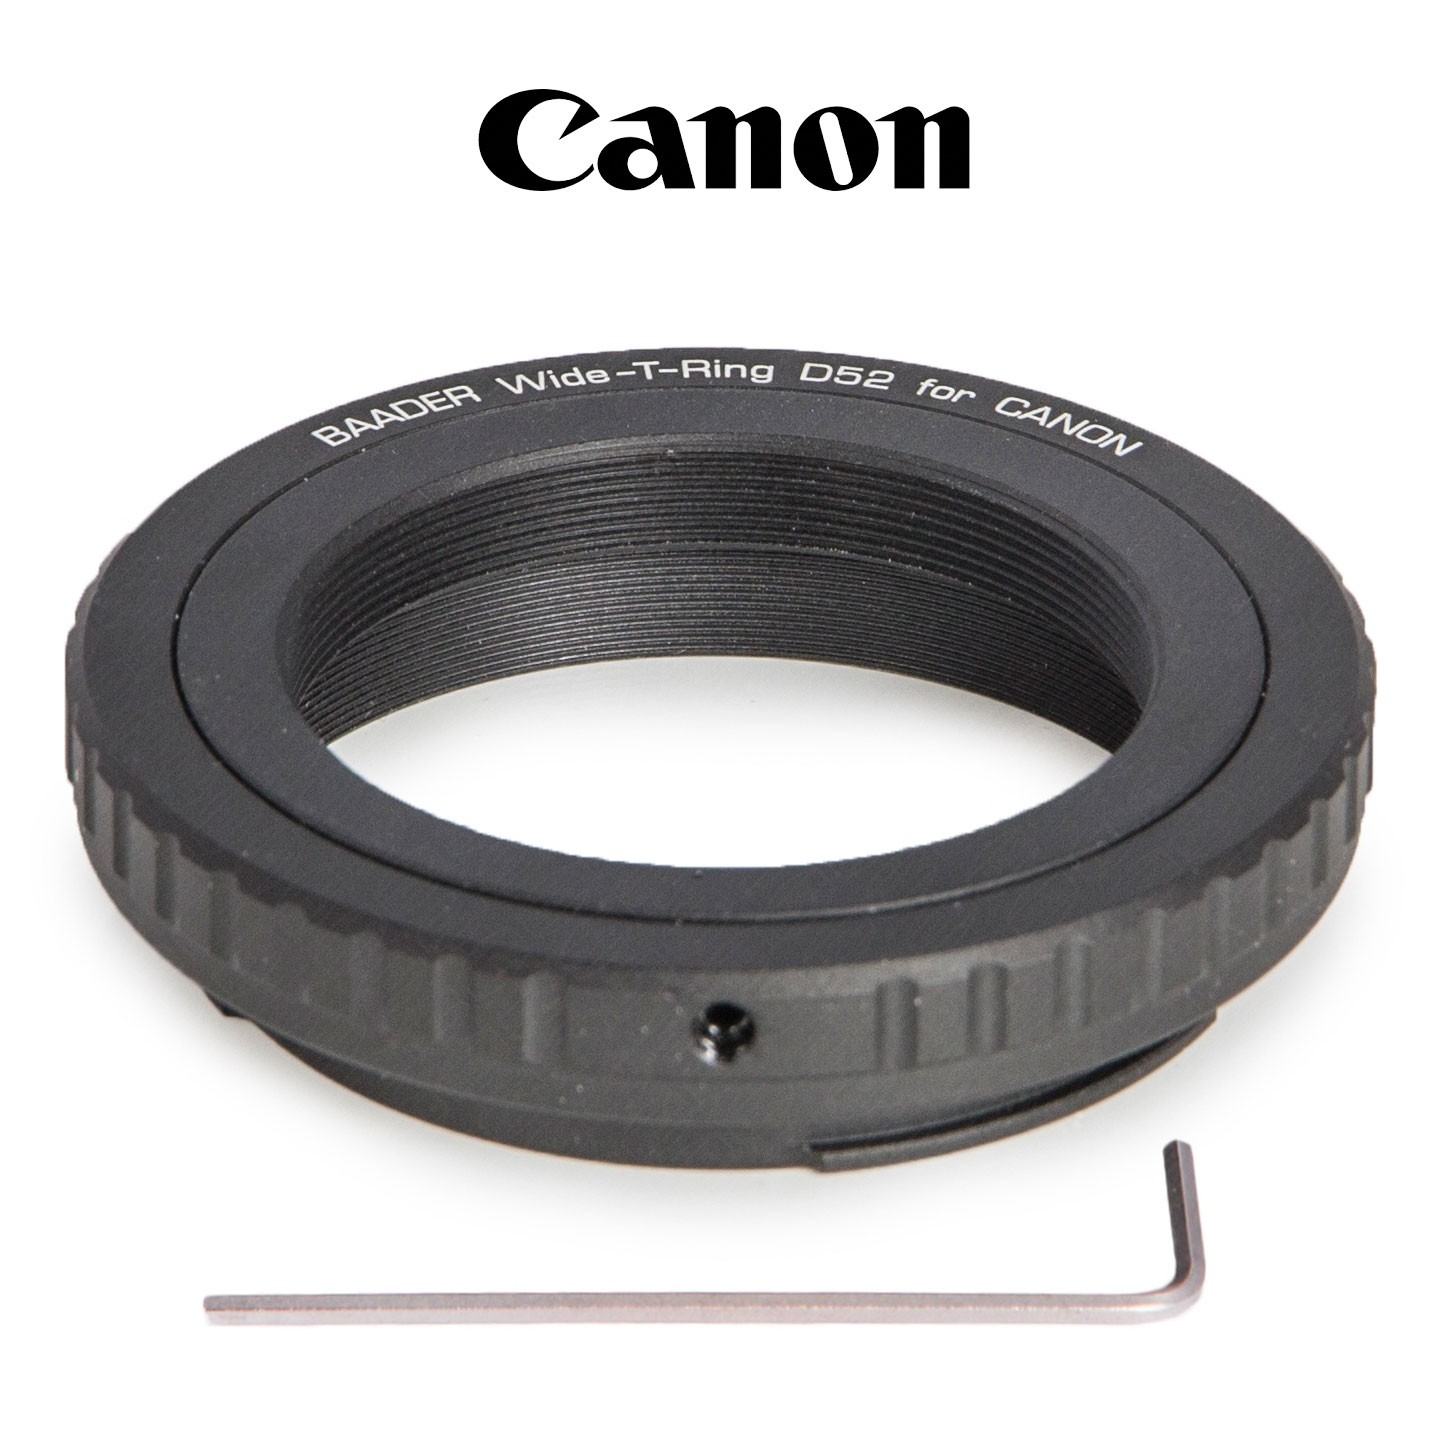 Baader Planetarium T-Ring for Canon EOS on T-2 Thread Connection 